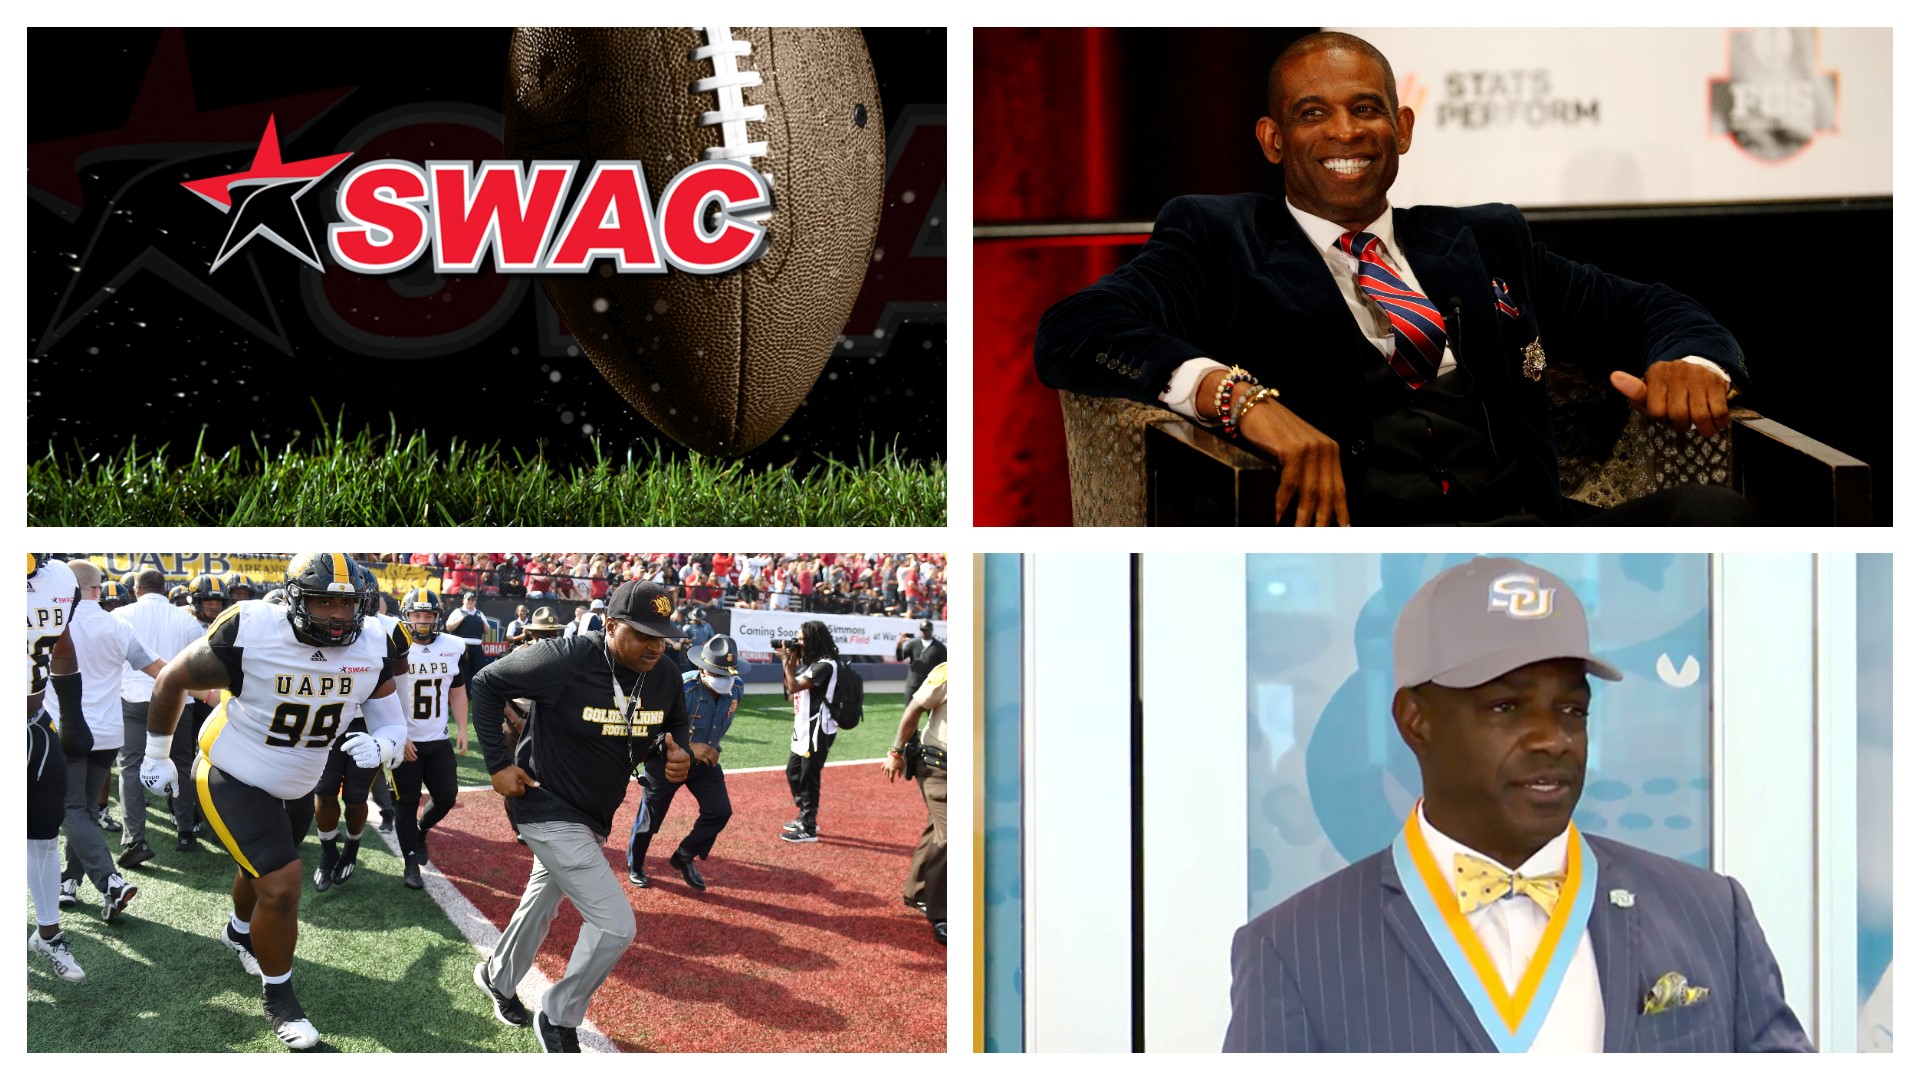 The SWAC is set to host a series of Classic football games in Birmingham in the future.